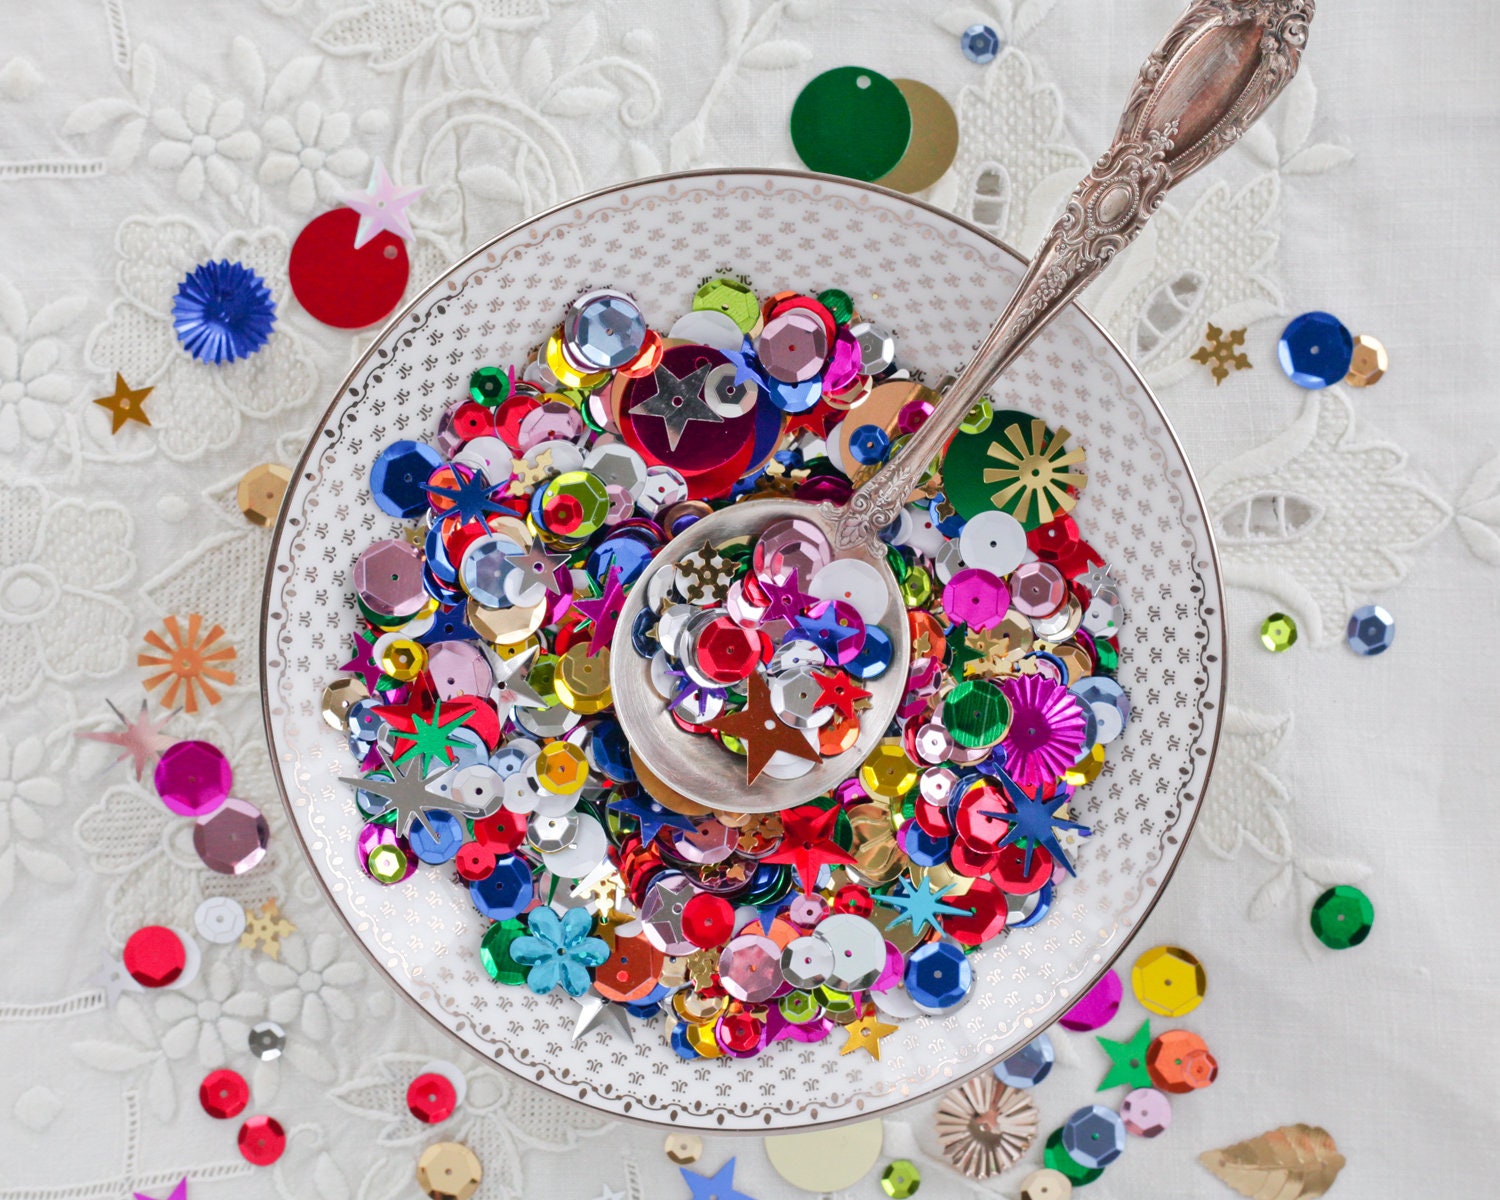 Sequins Crafts Spangles Craft Iridescent Diy Glitter Loose Mixed Cup Sequin  Embellishments Christmas Supplies 